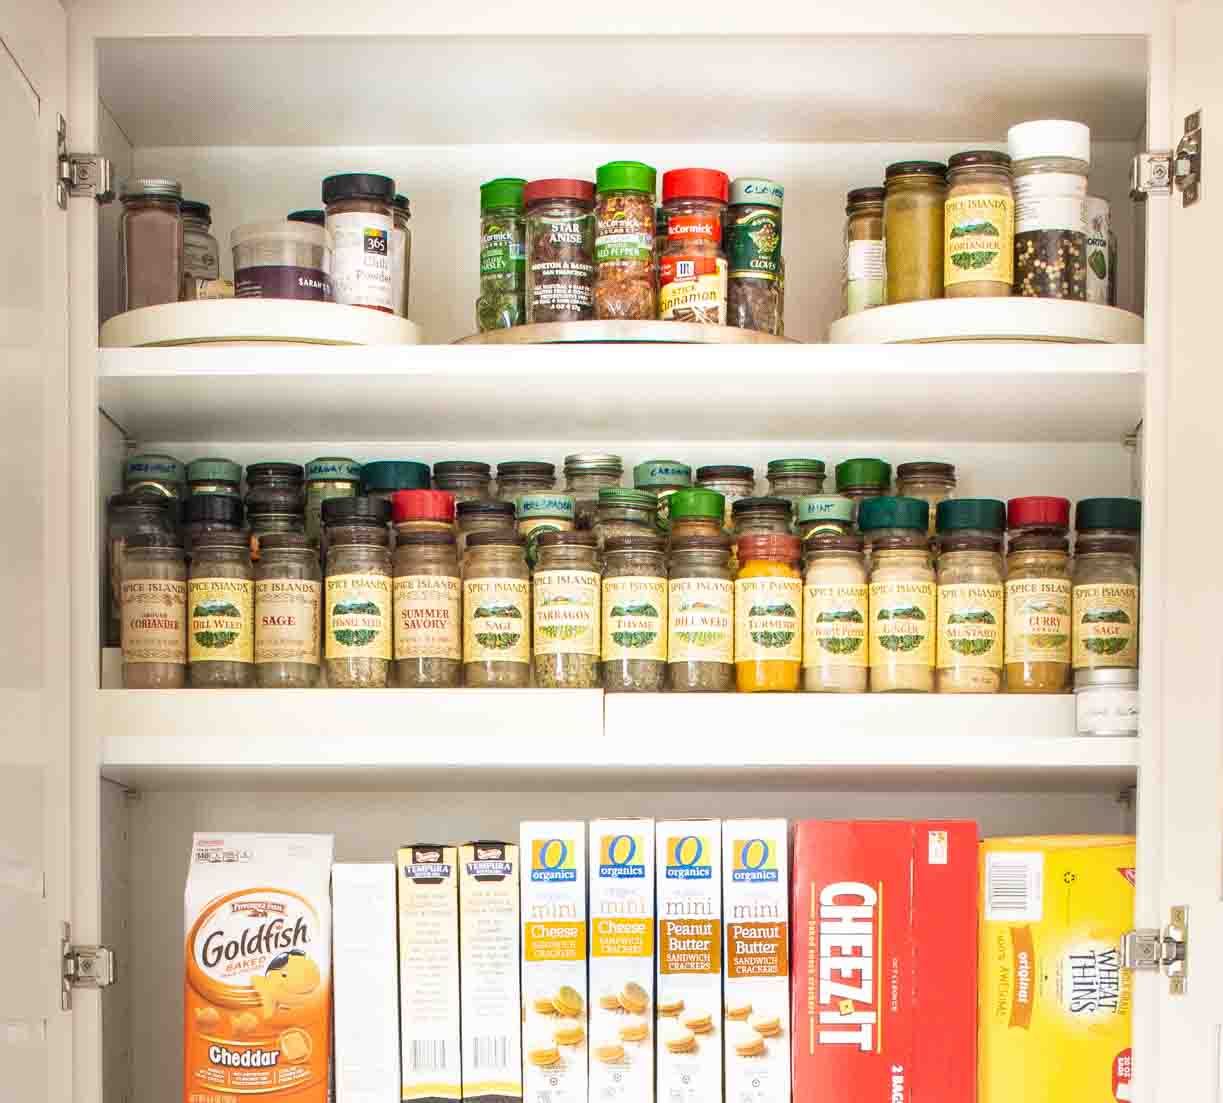 9 Tips For Kitchen Organization made easy. Follow these tried and true steps, your kitchen will be thoroughly organized. A well-organized kitchen is great.